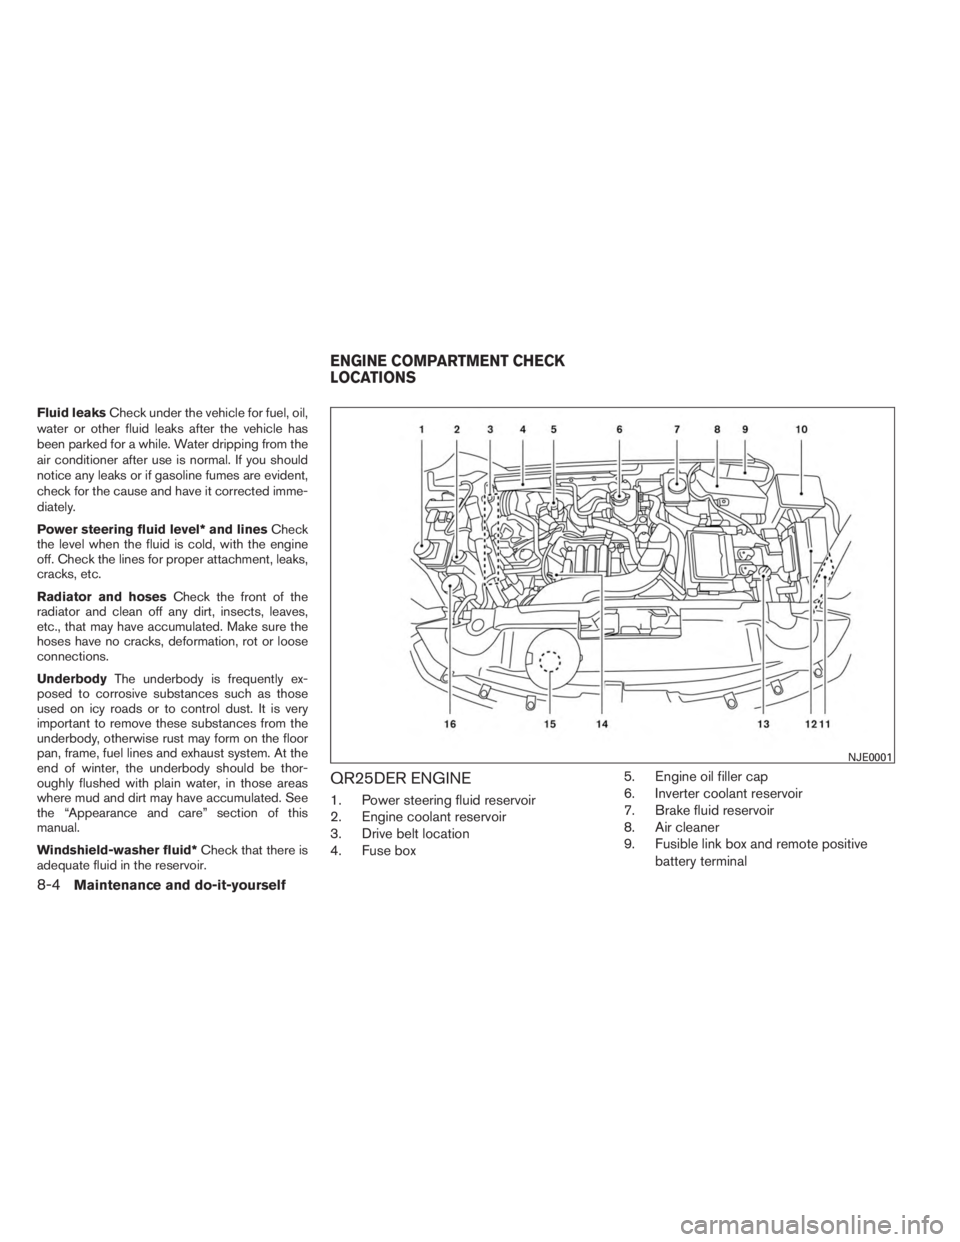 INFINITI QX60 HYBRID 2014  Owners Manual Fluid leaksCheck under the vehicle for fuel, oil,
water or other fluid leaks after the vehicle has
been parked for a while. Water dripping from the
air conditioner after use is normal. If you should
n